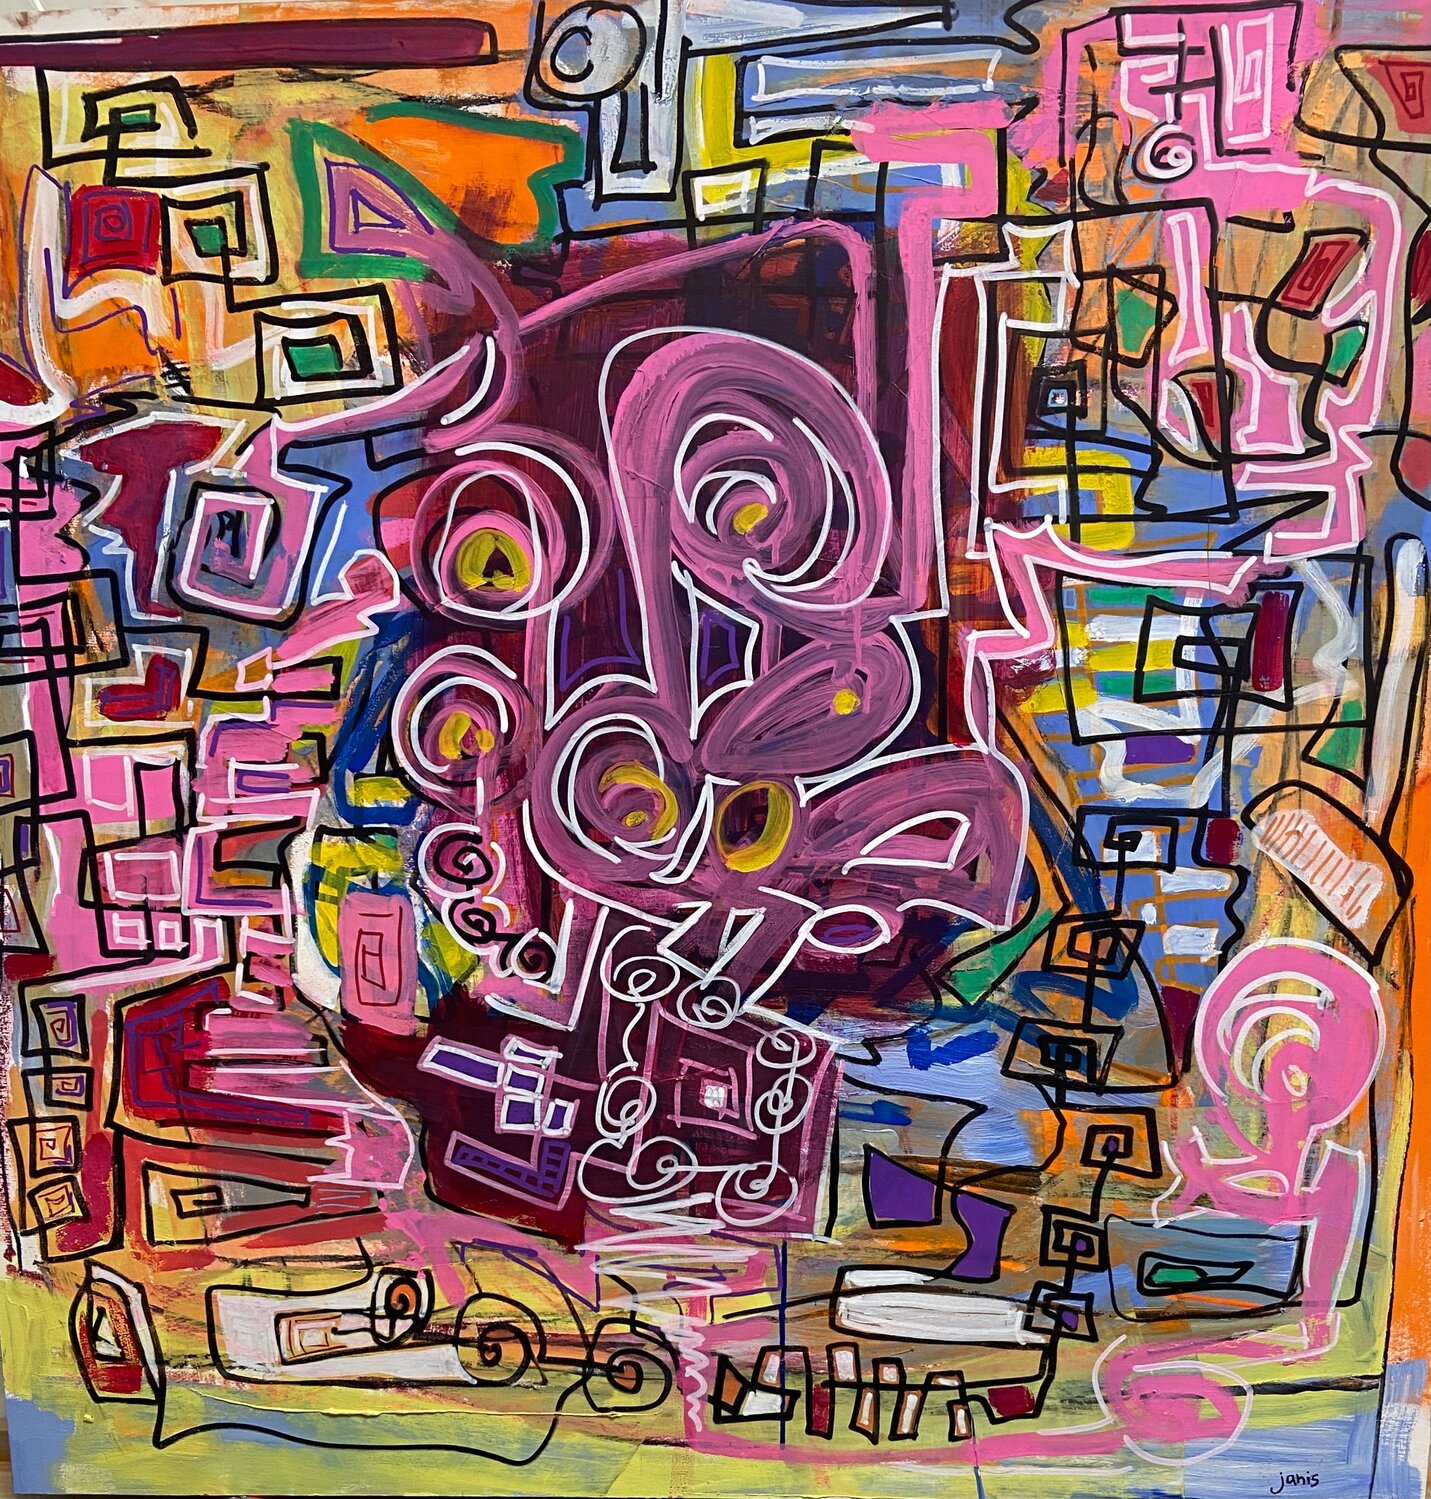 “Tied Up in a Knot,” by Janis Schimsky, is an acrylic on canvas.